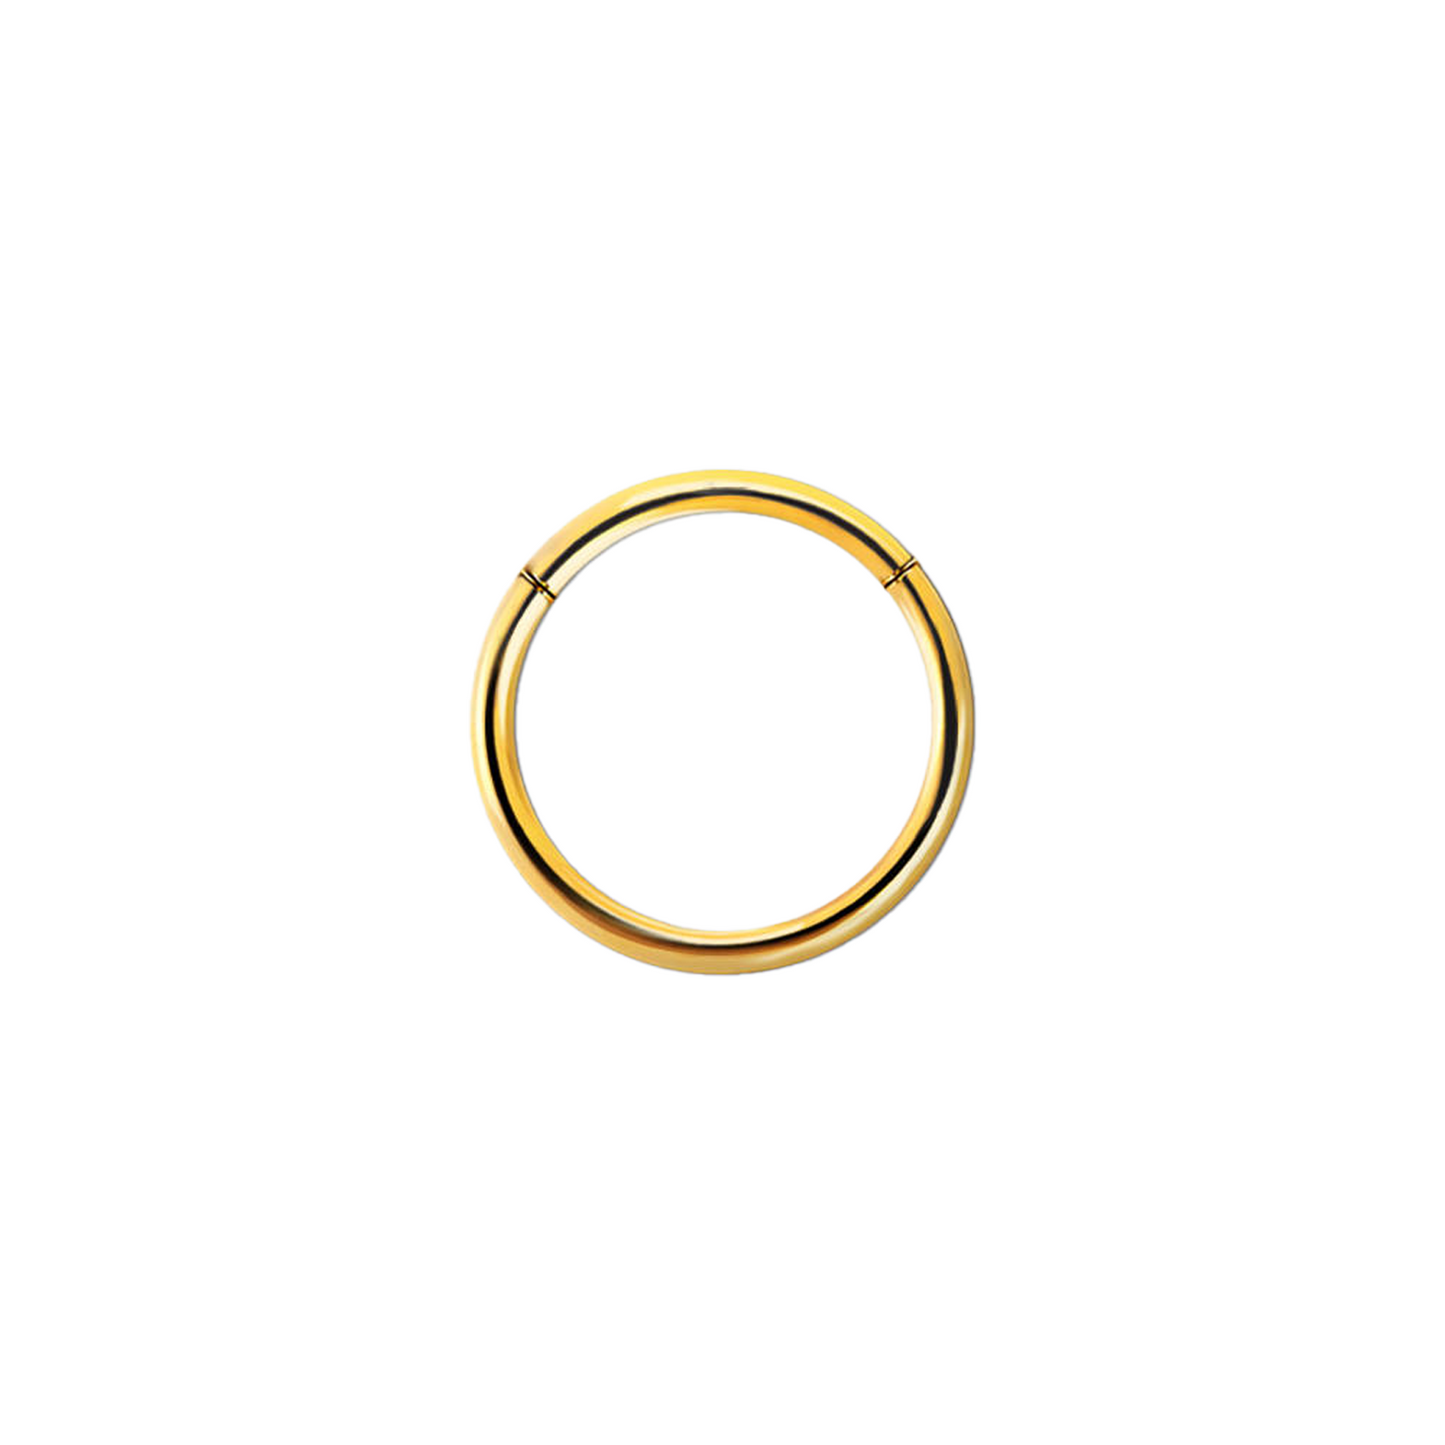 20g Gold PVD Plated Surgical Steel Hinged Ring